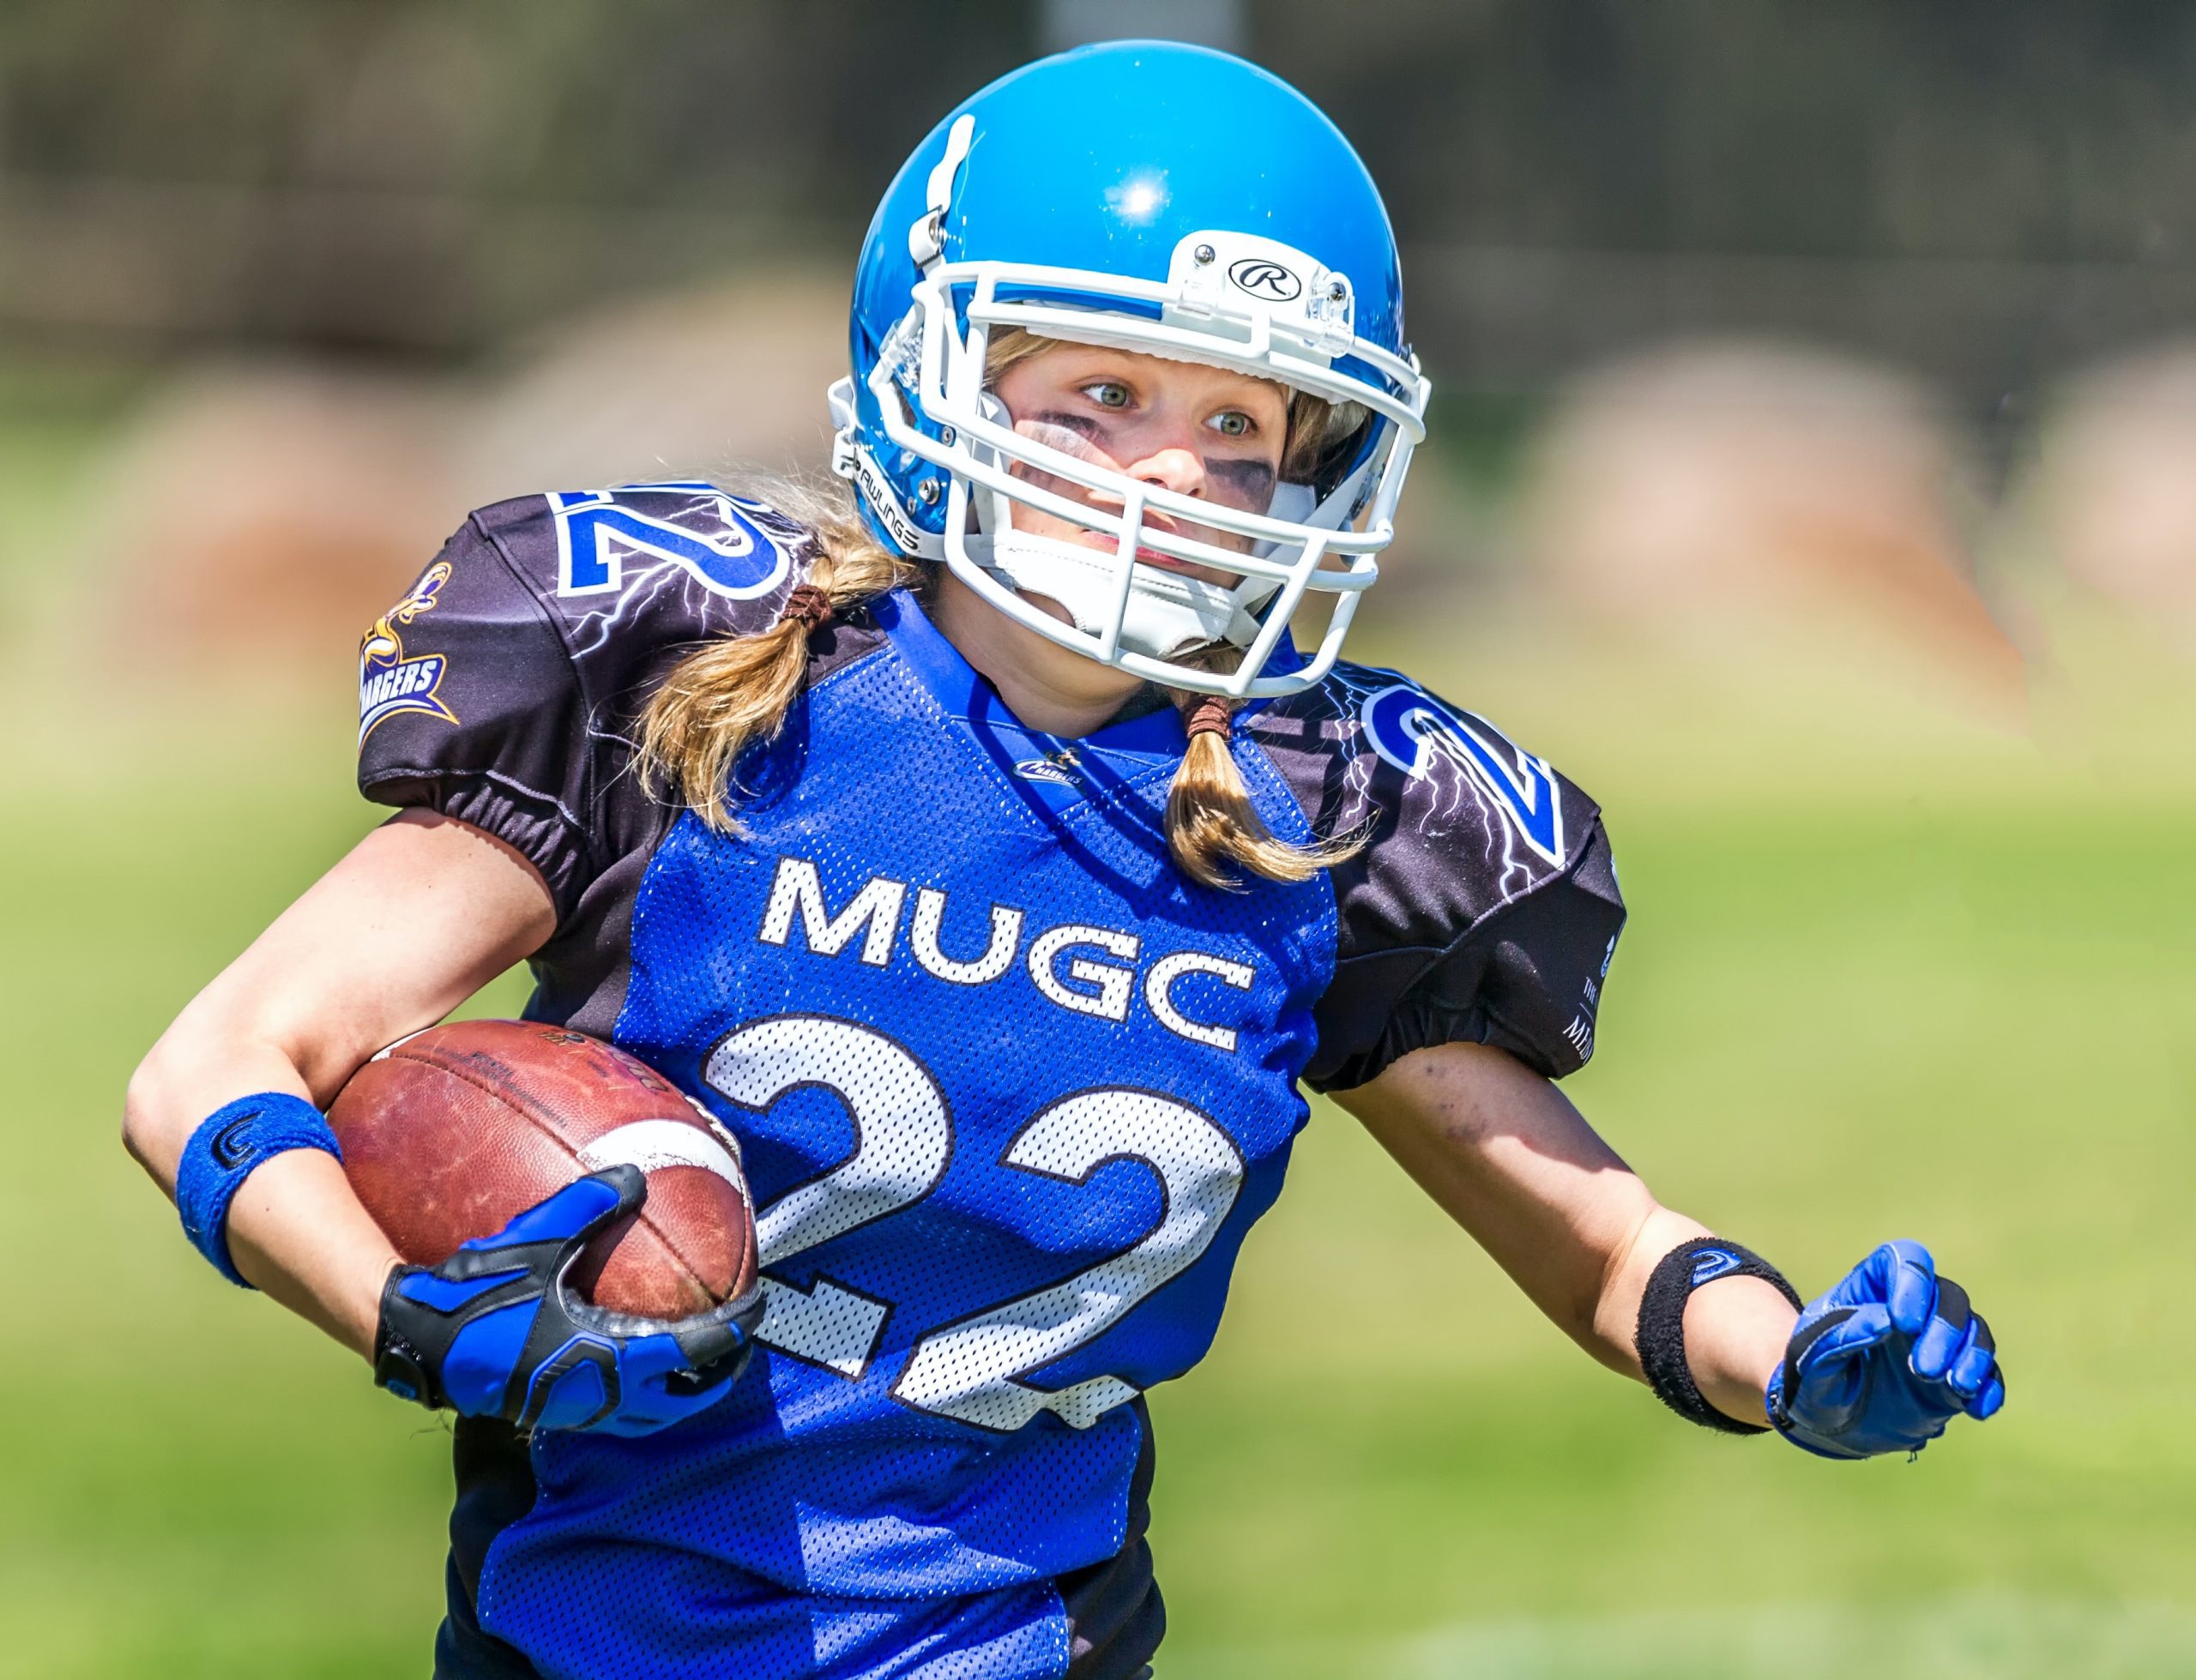 Five Reasons Why Your Child Should Play Sports